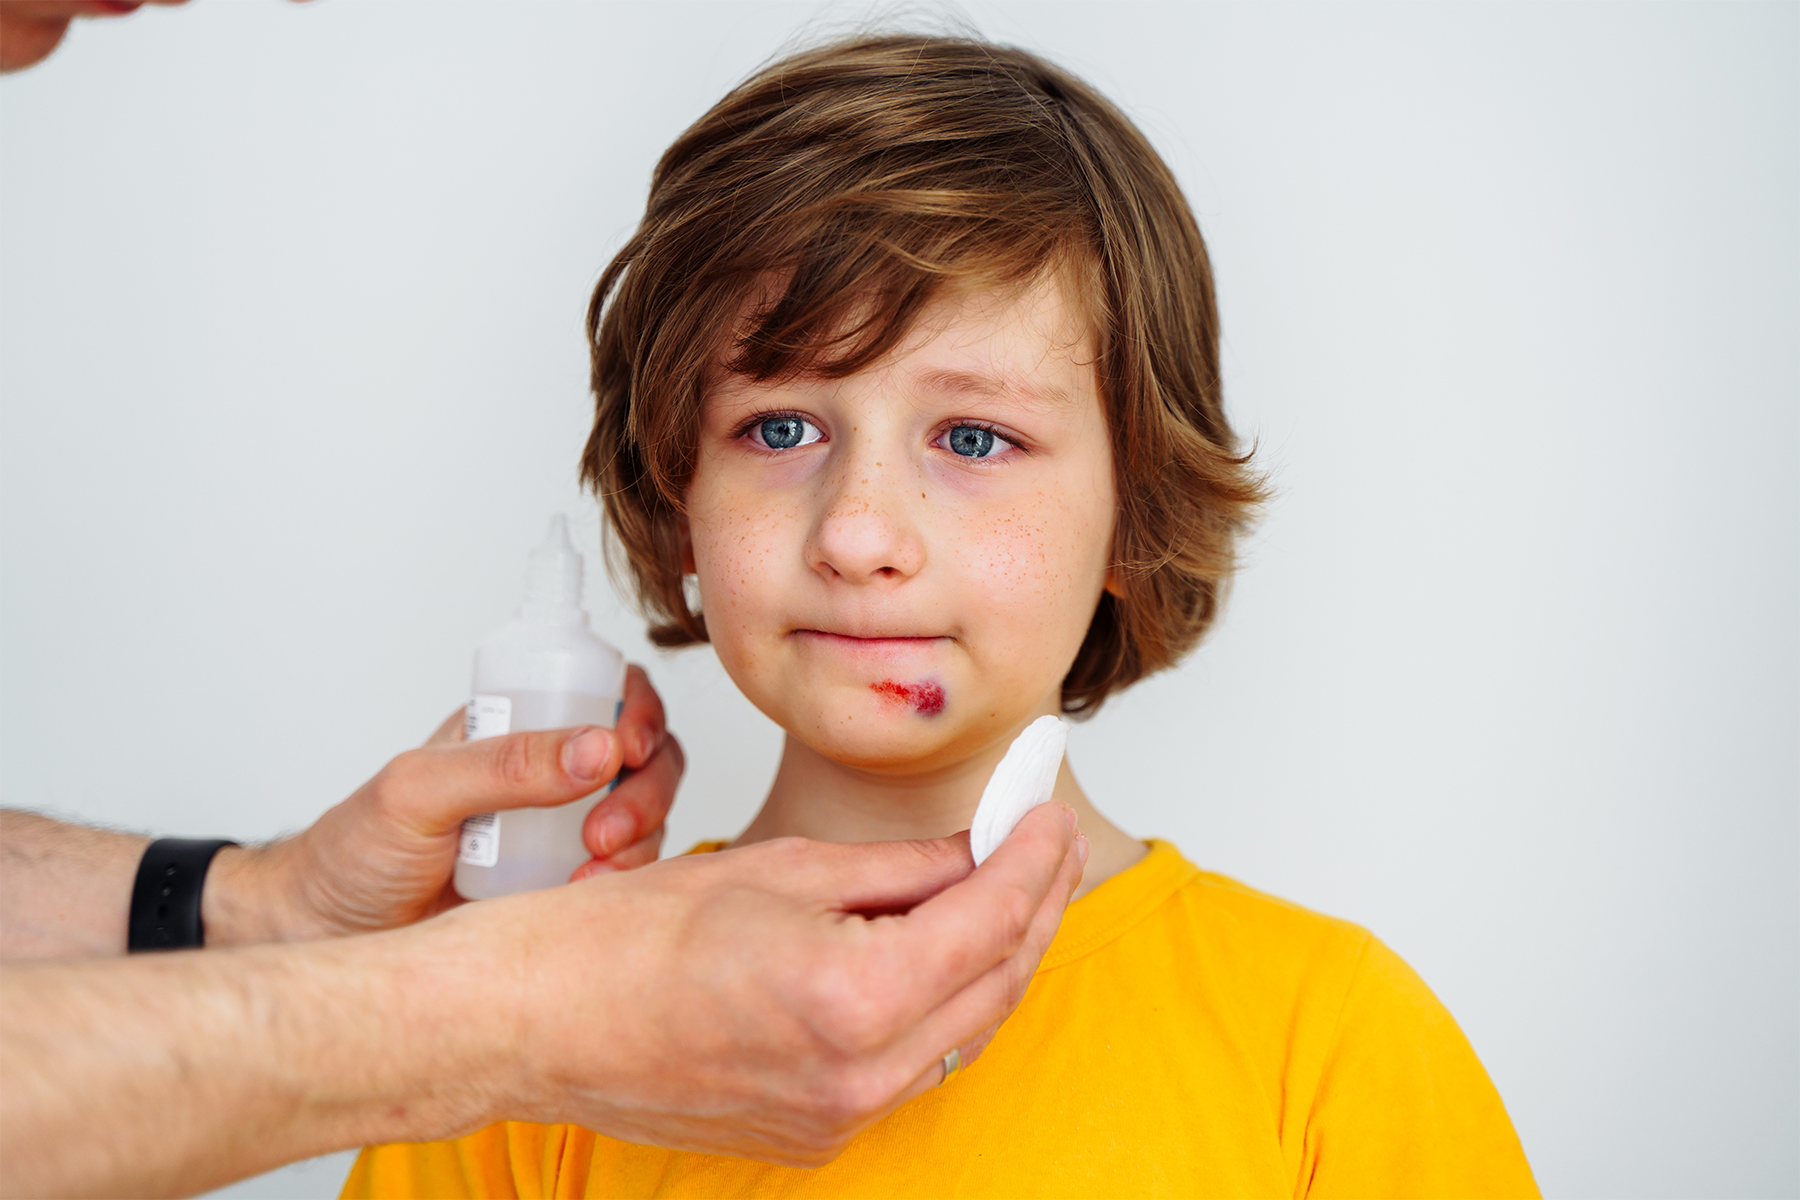 cleaning young boys wound on face